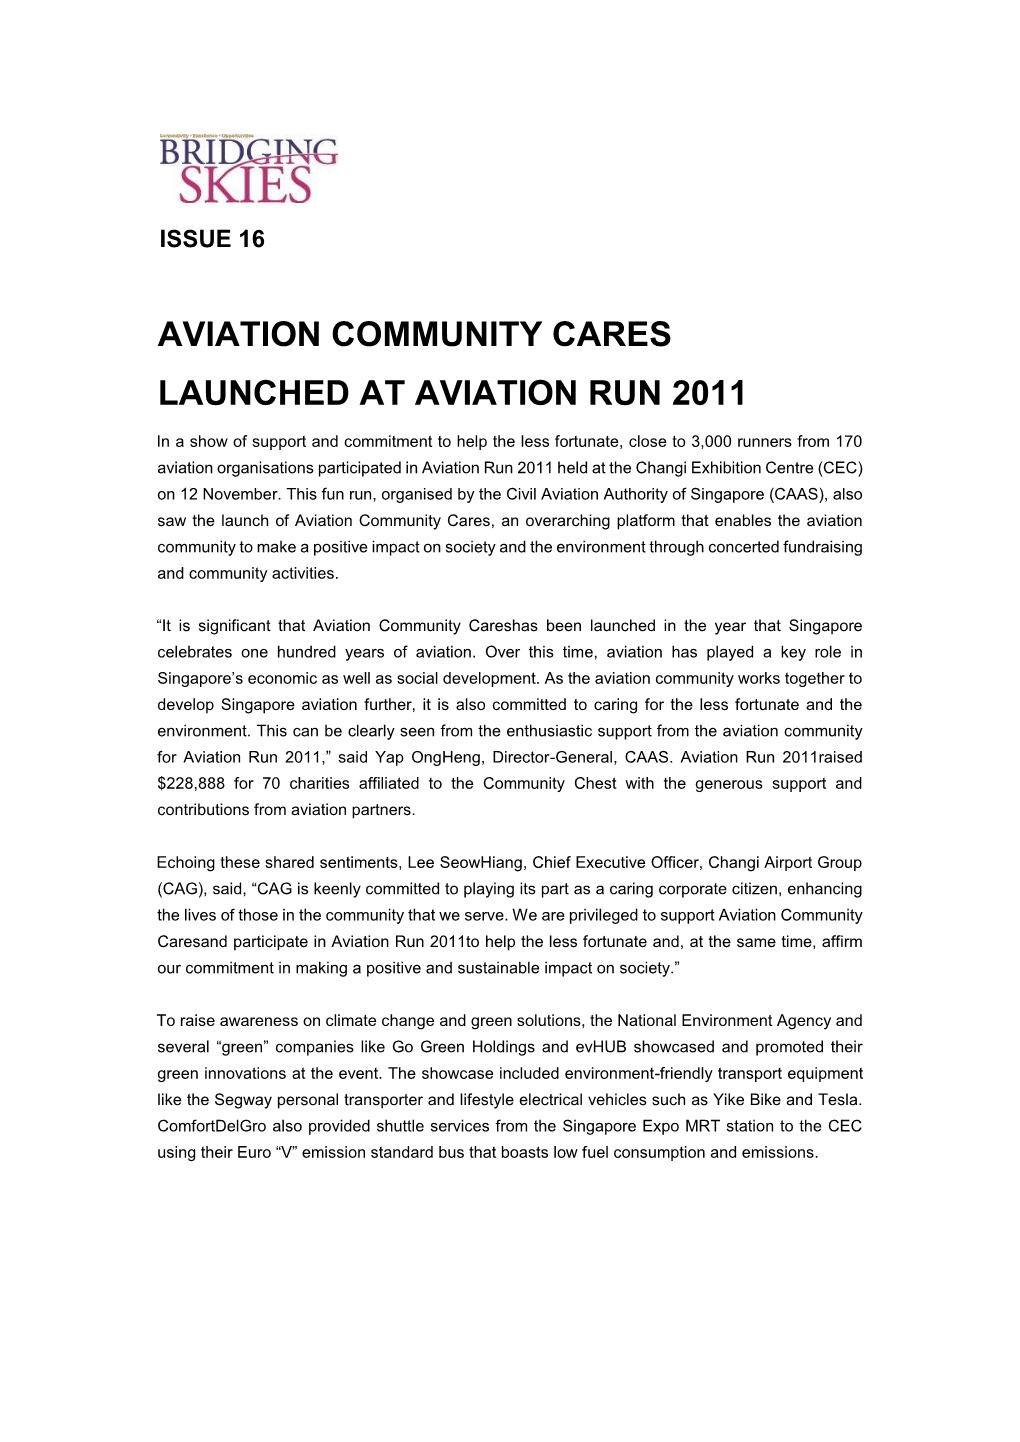 Aviation Community Cares Launched at Aviation Run 2011